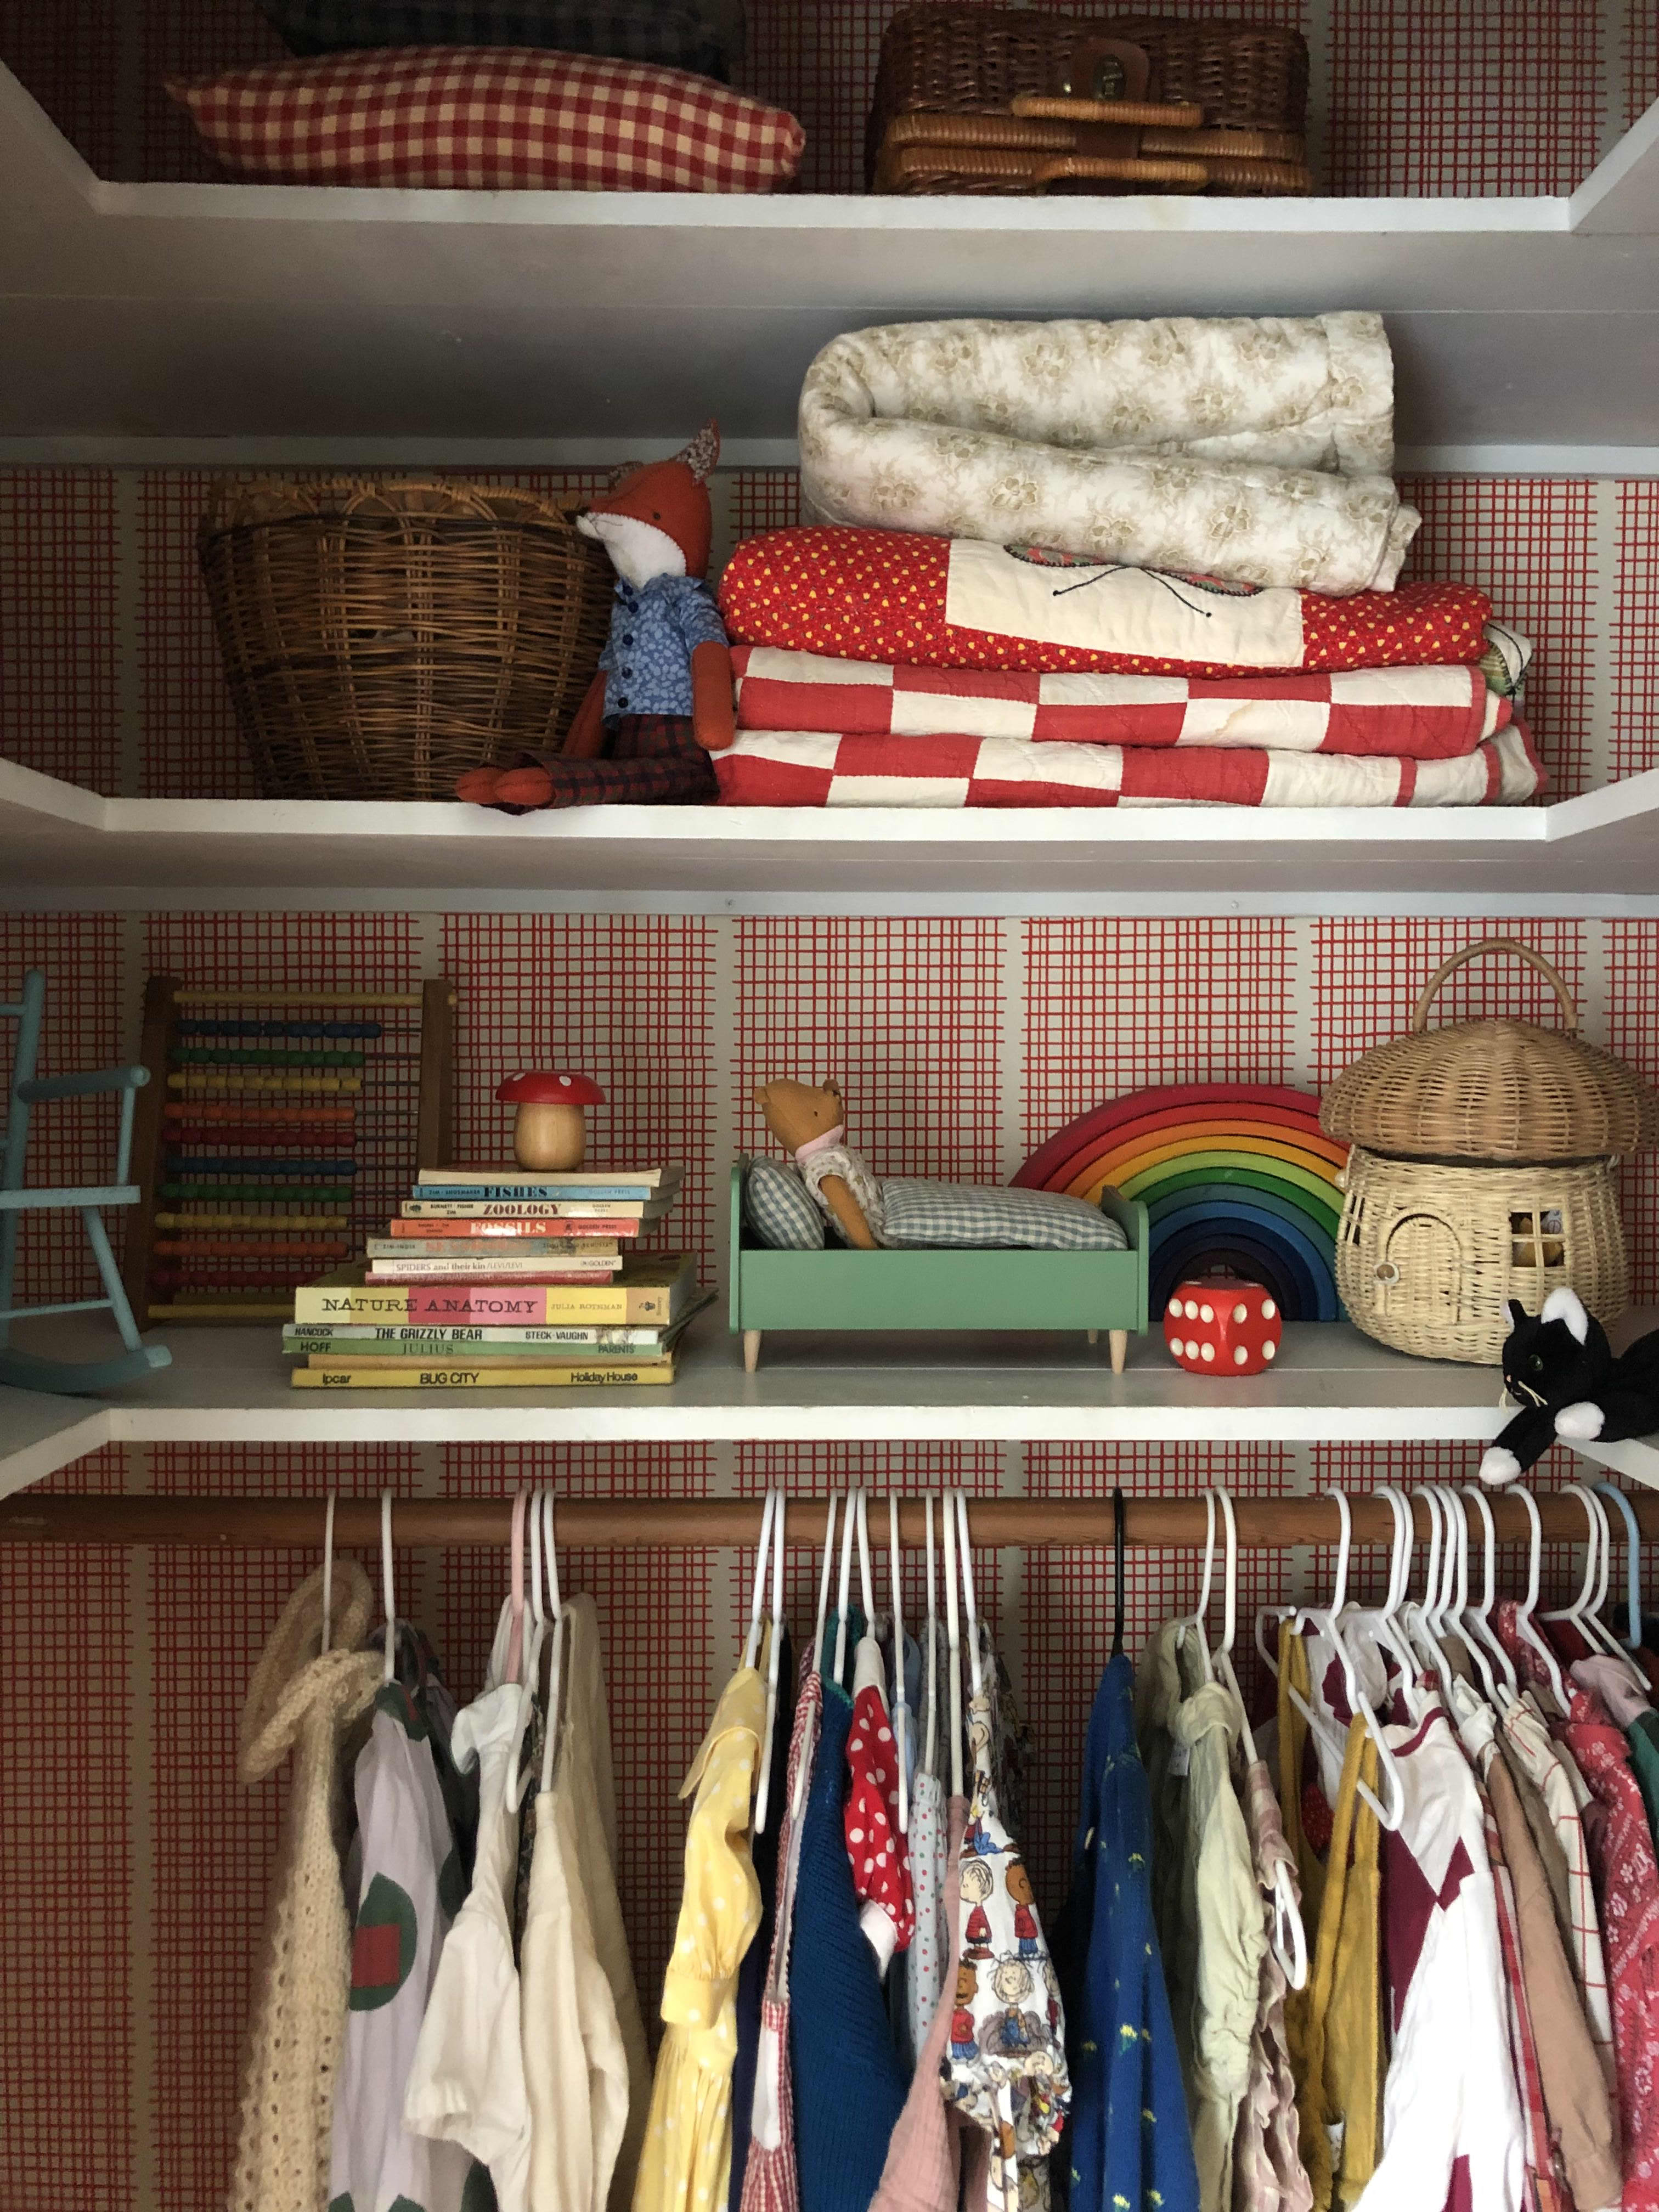 Looking for big ideas on how to store kids' stuff in small spaces?